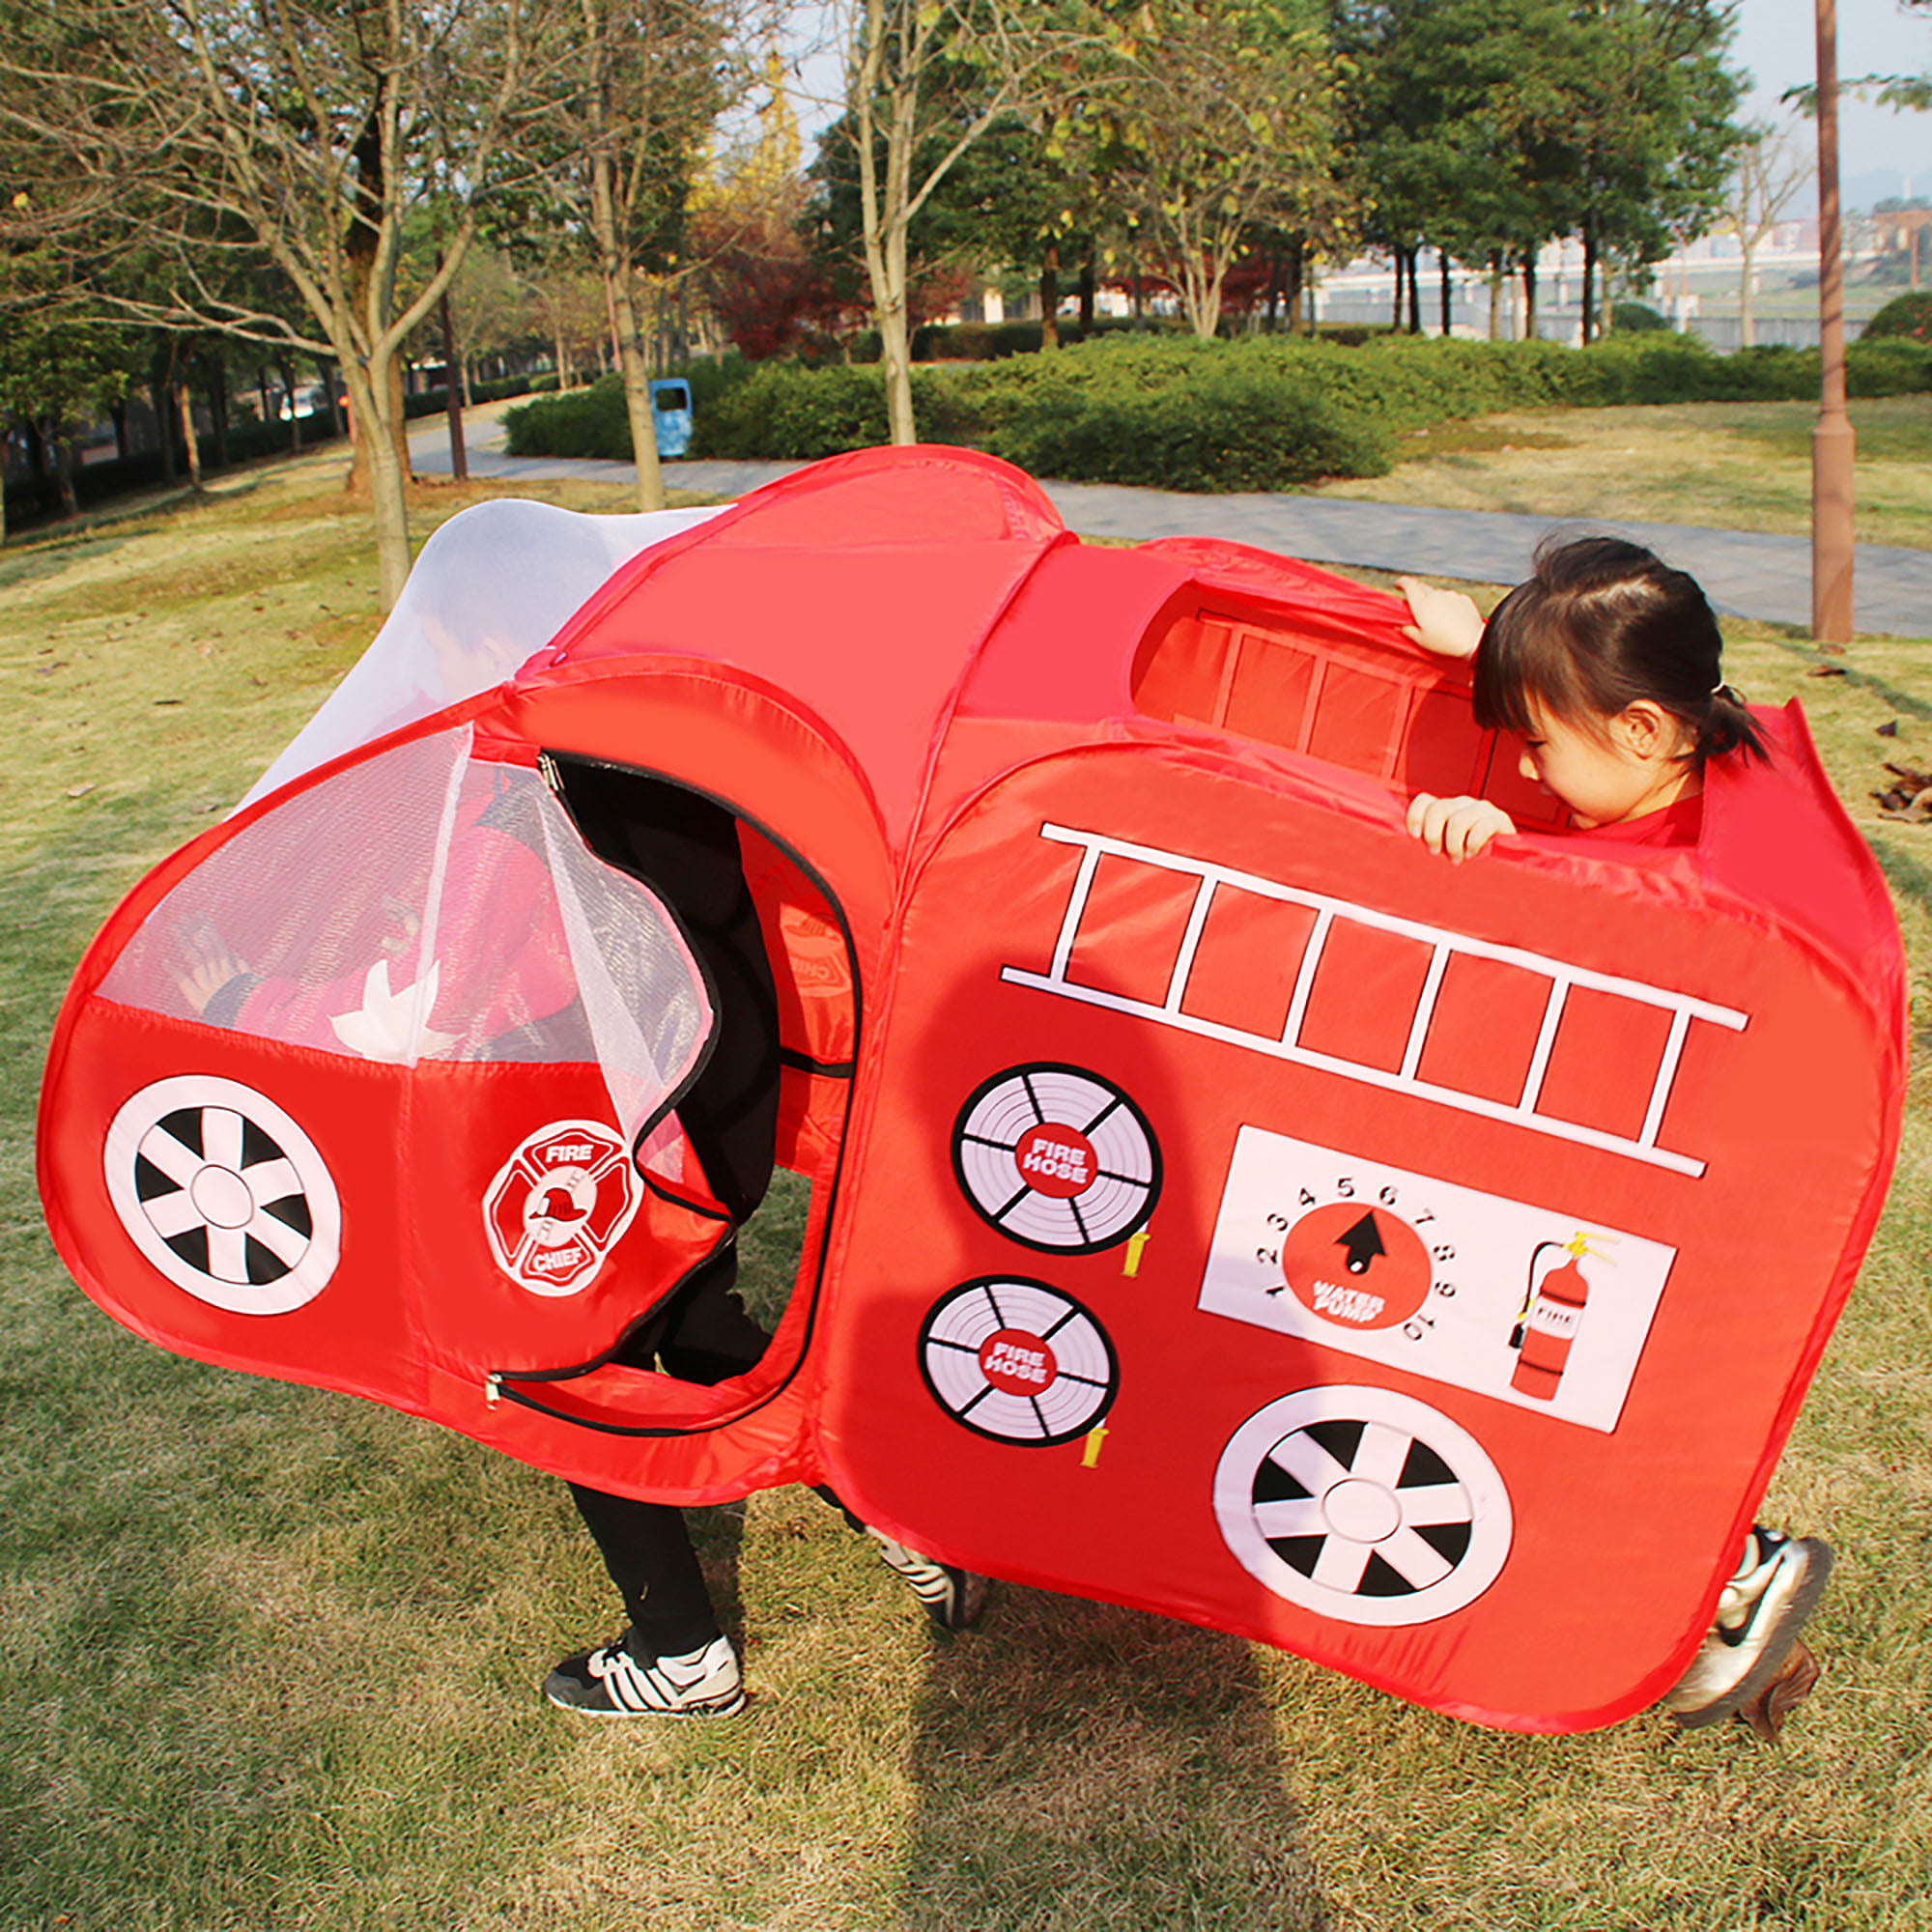 New Play Tunnel Folding Portable Playpen Tent Play Yard for Kids Children Play 